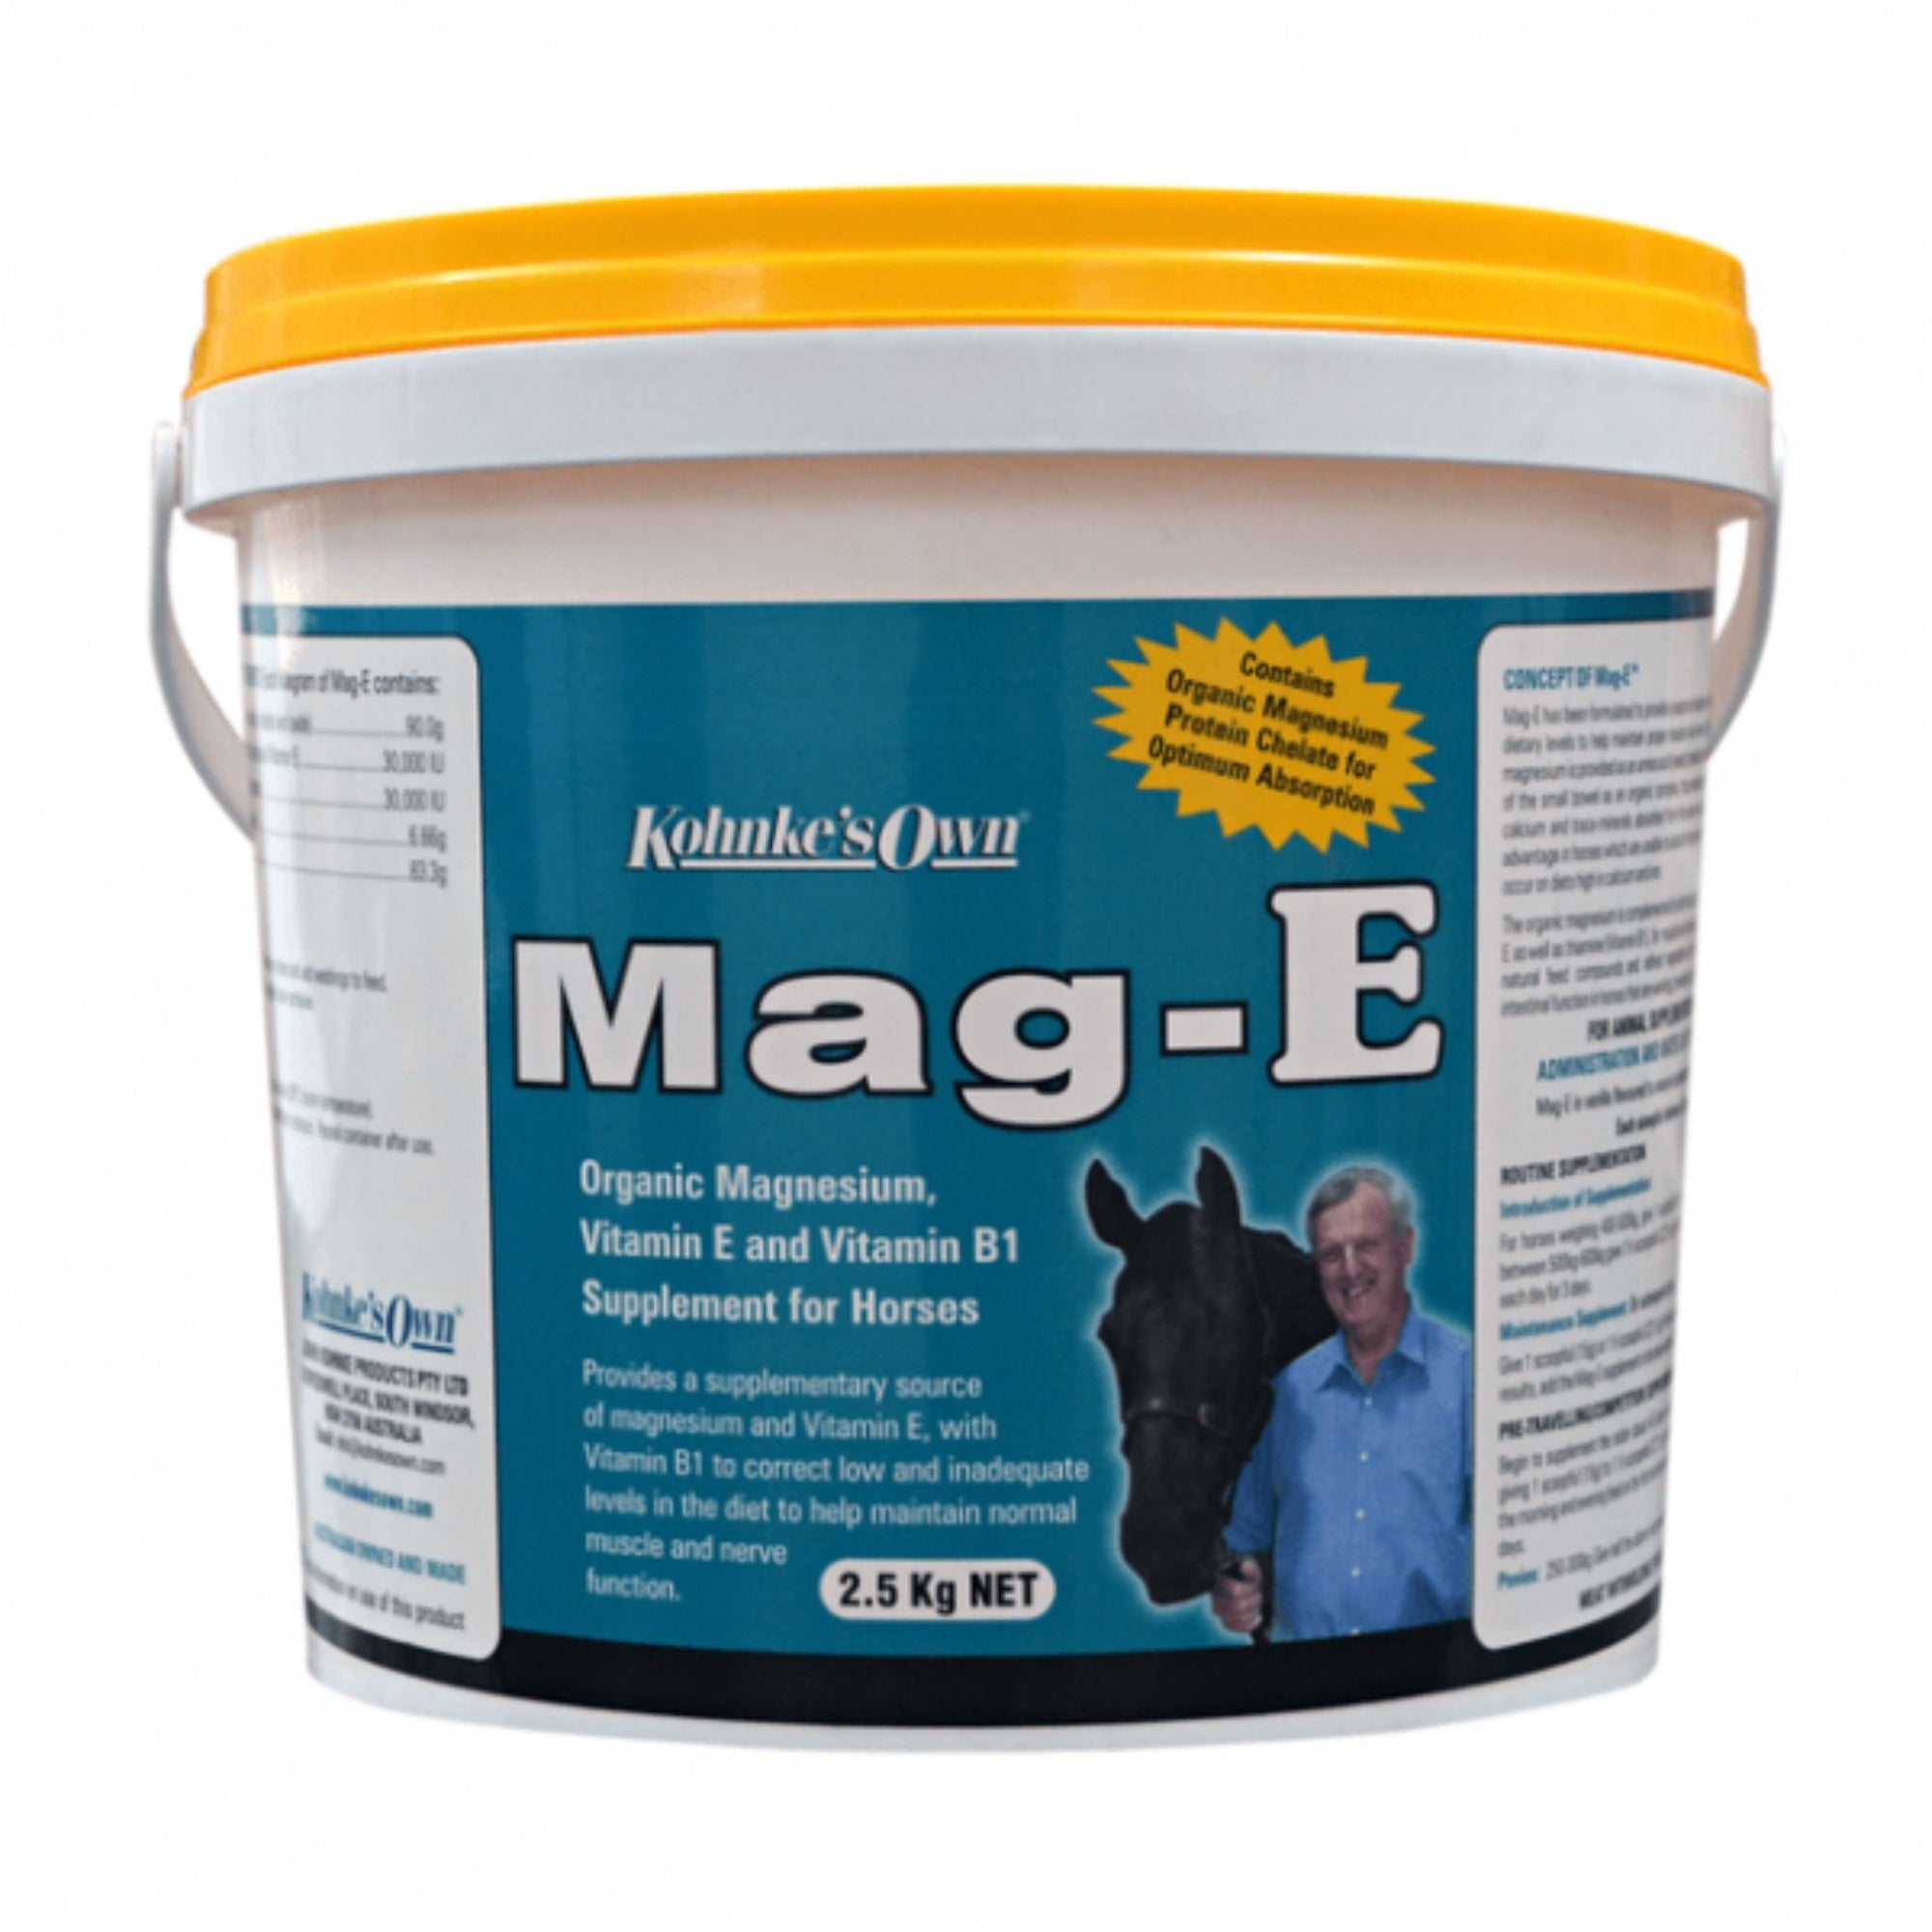 White bucket of Mag-E with yellow lid, handle, and blue label.